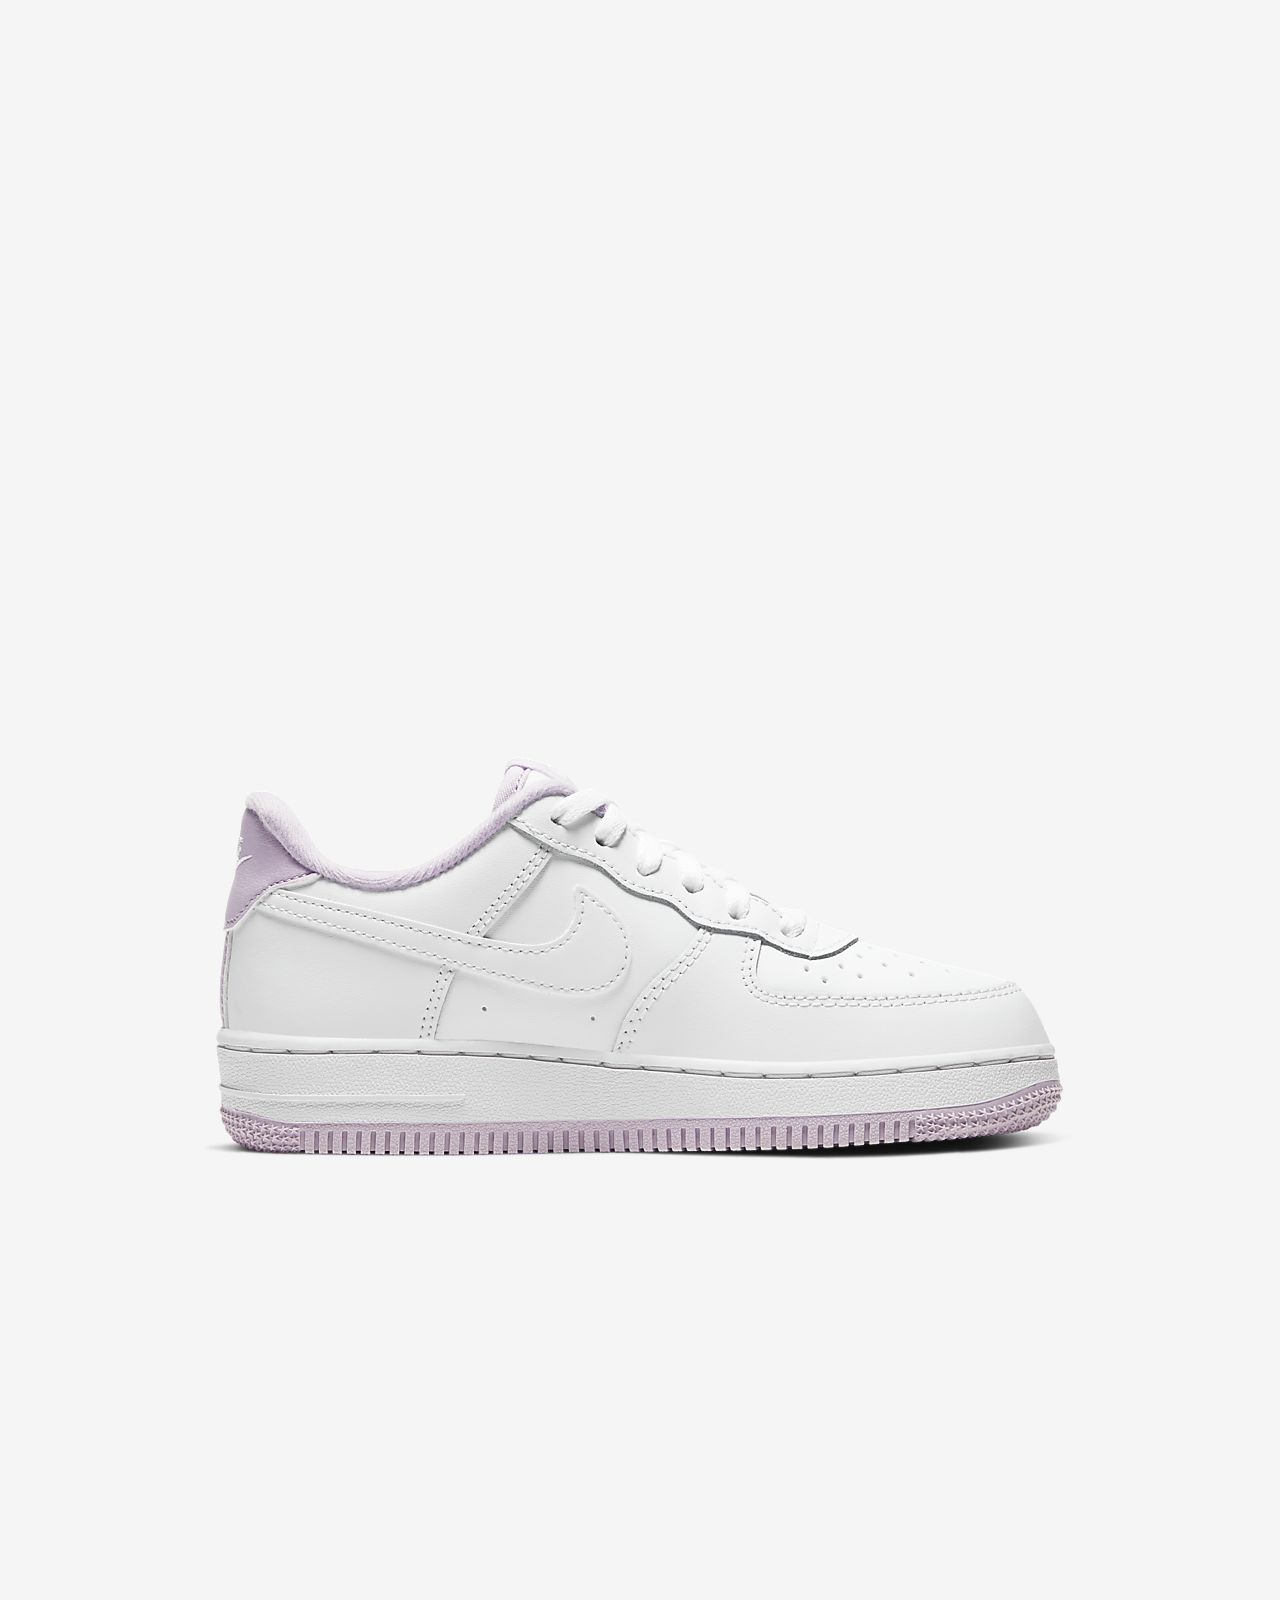 nike air force 1 pastel violet closeout 